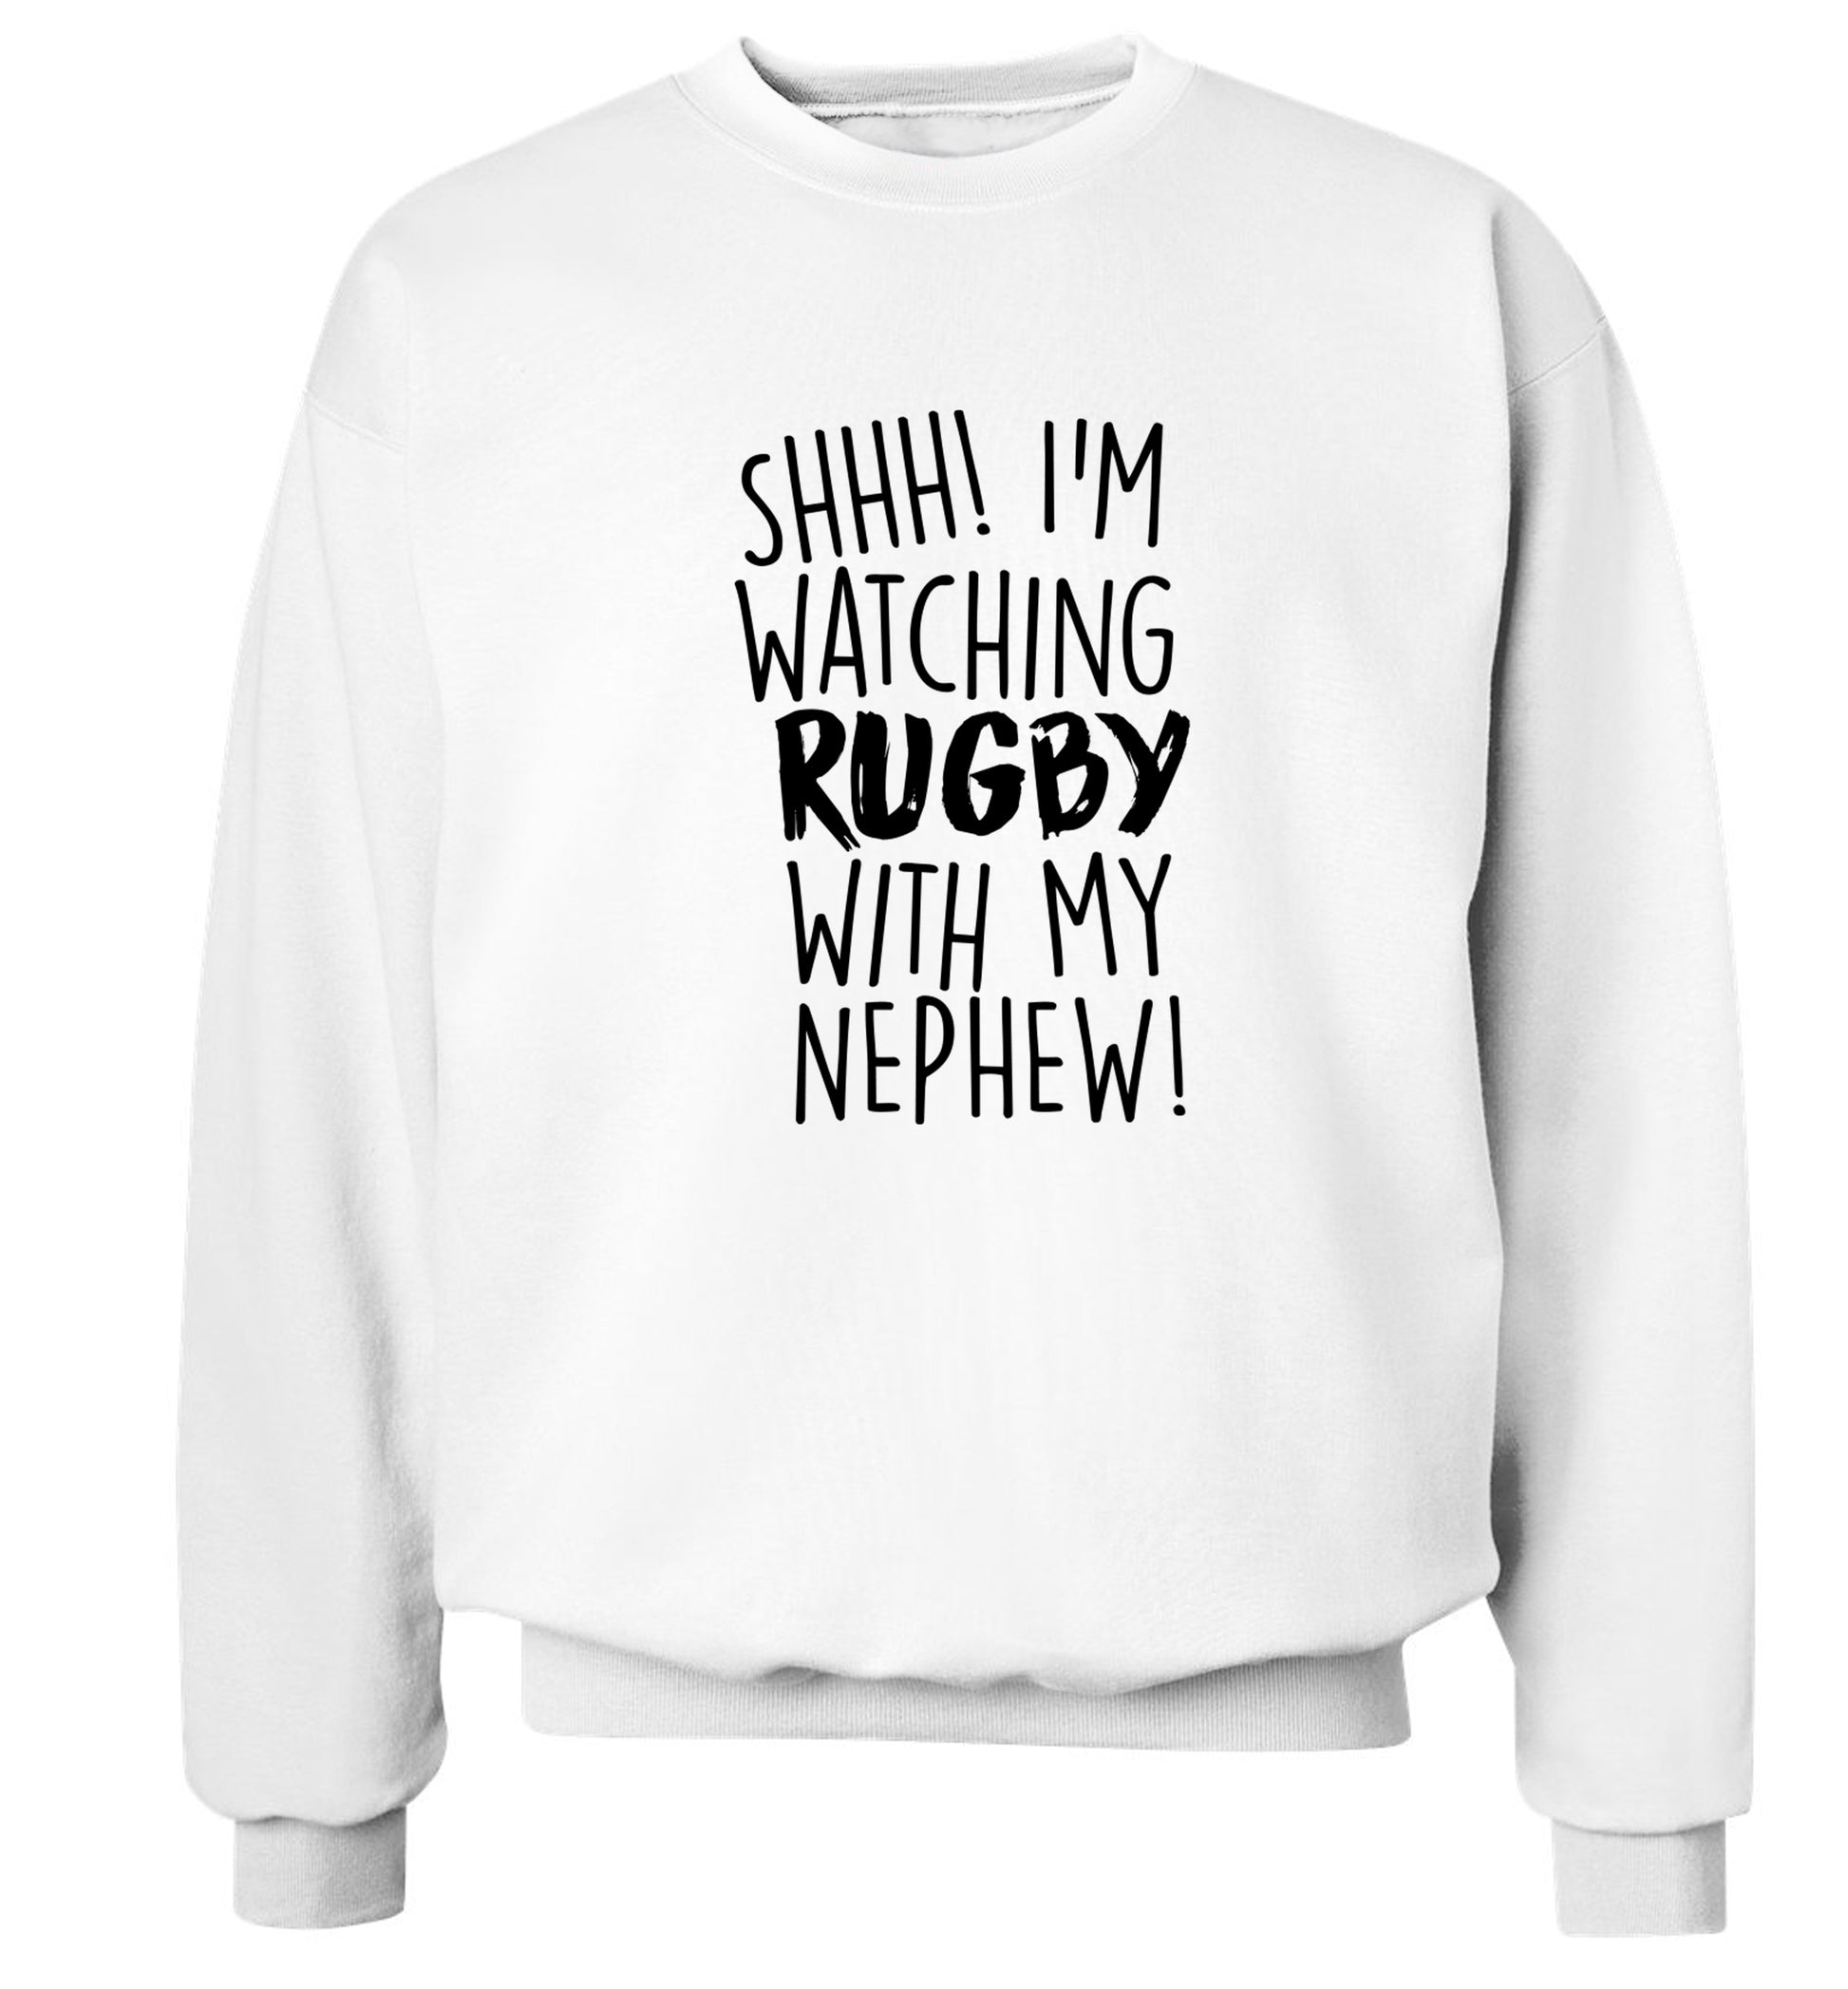 Shh.. I'm watching rugby with my nephew Adult's unisex white Sweater 2XL